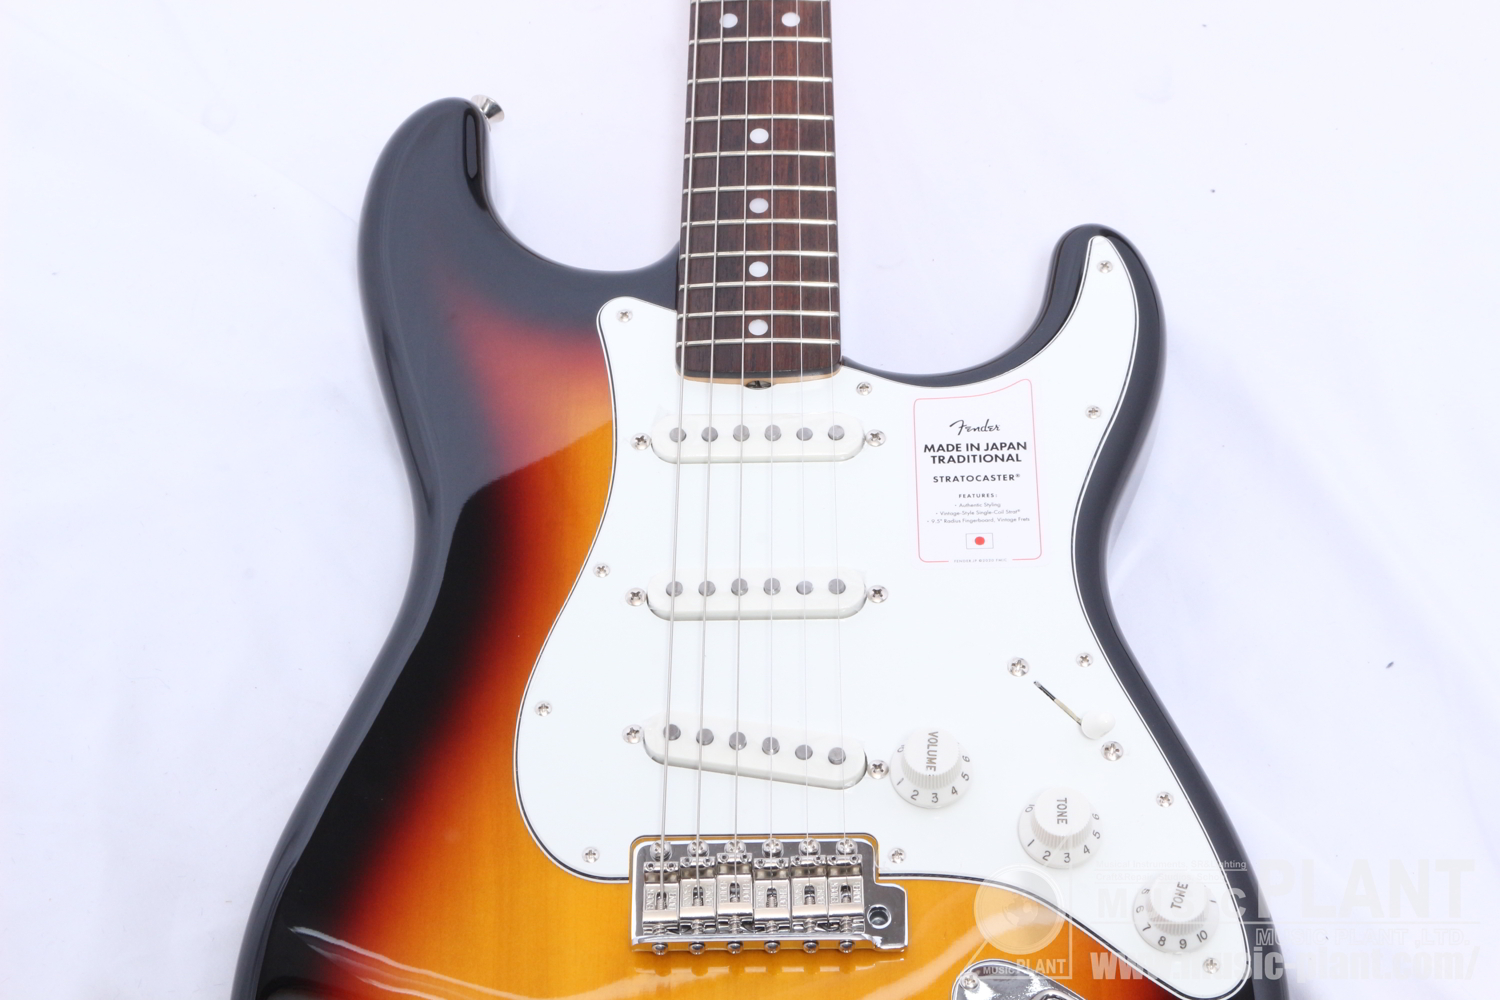 Made in Japan Traditional Late 60s Stratocaster 3-Color Sunburst追加画像